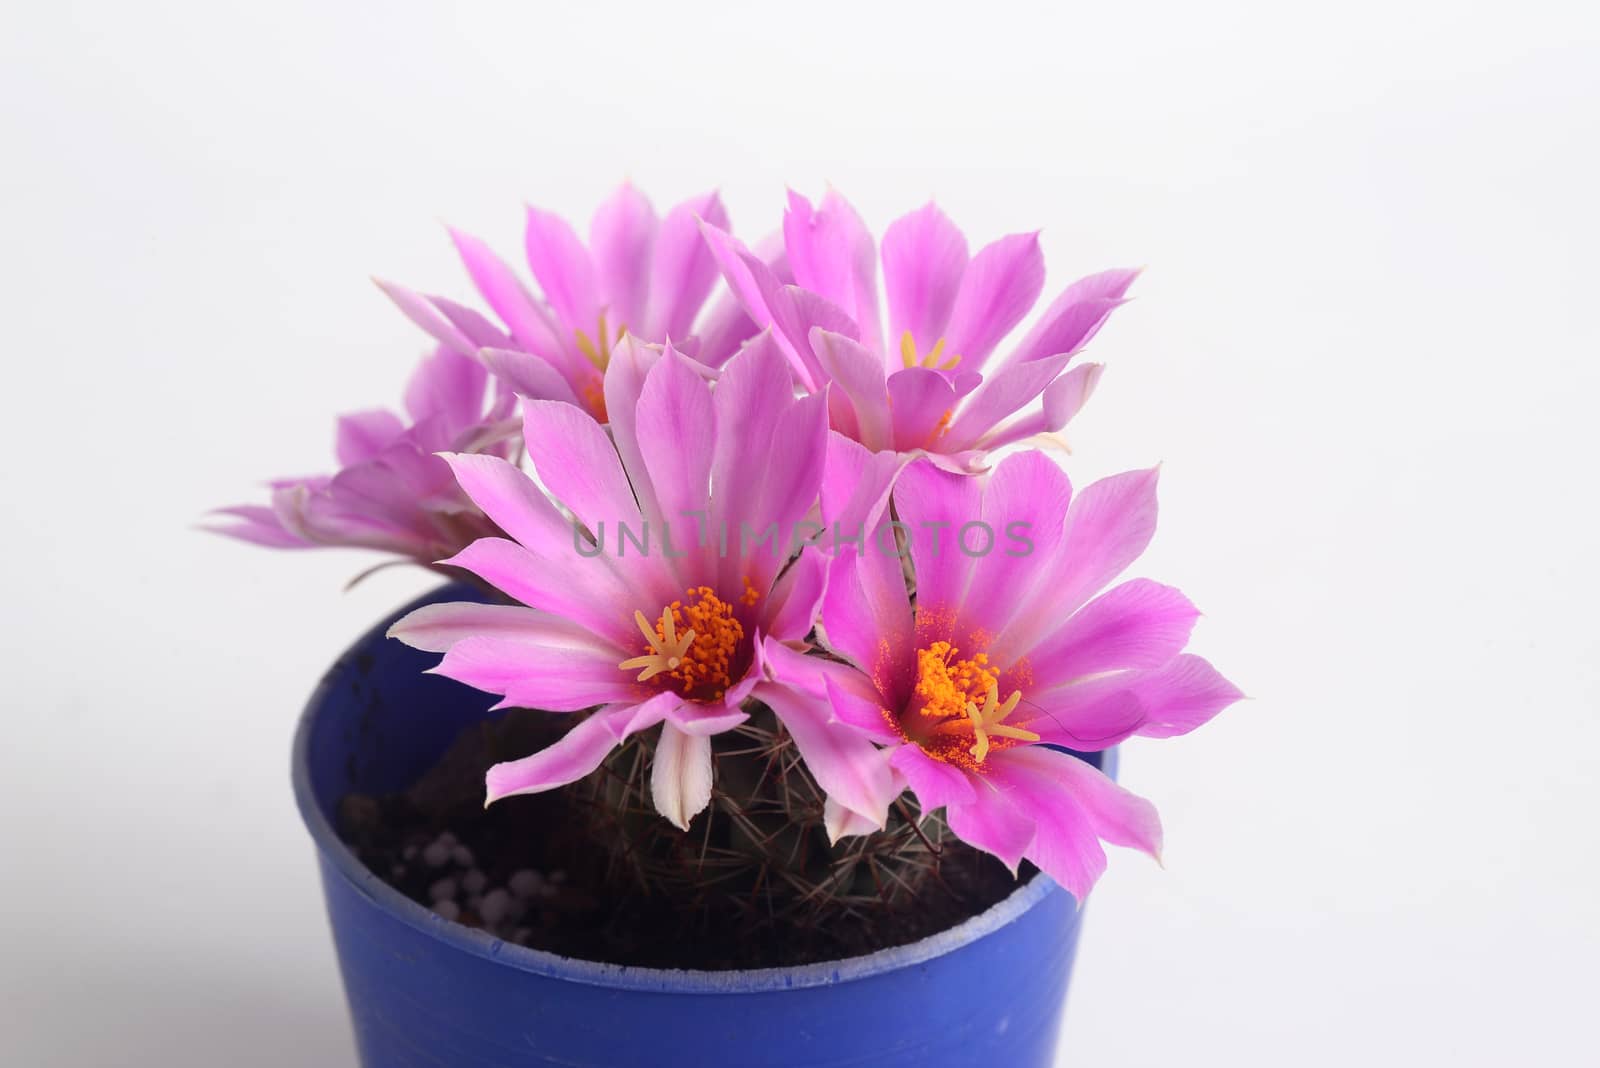 Blooming pink  flower of Mammillaria schumannii  cactus on  white  background with copy space for text